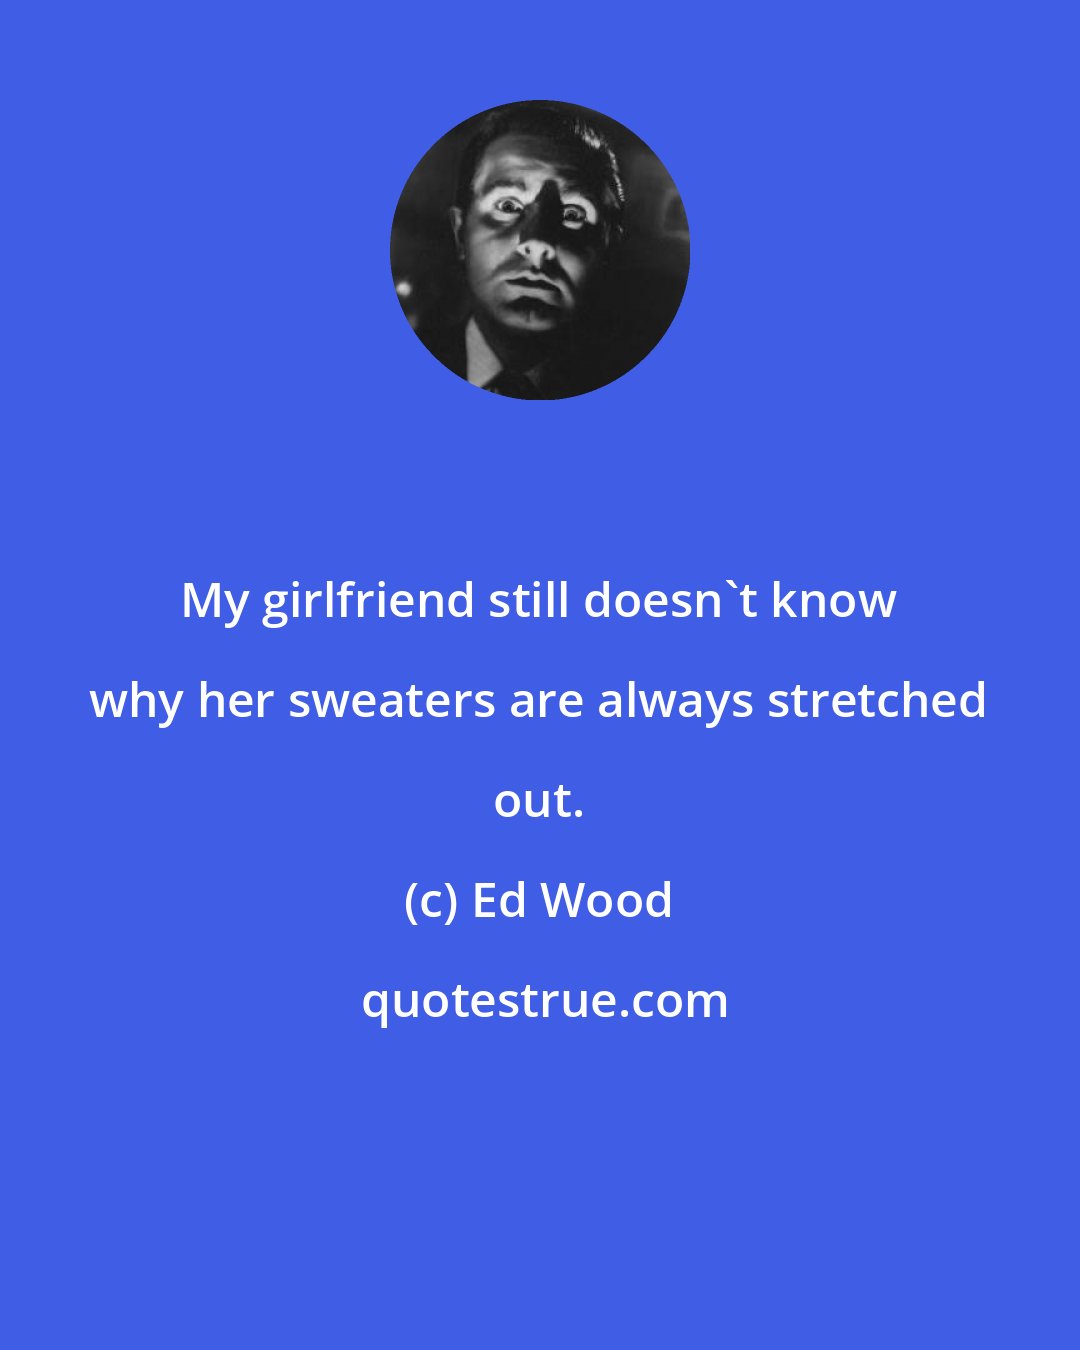 Ed Wood: My girlfriend still doesn't know why her sweaters are always stretched out.